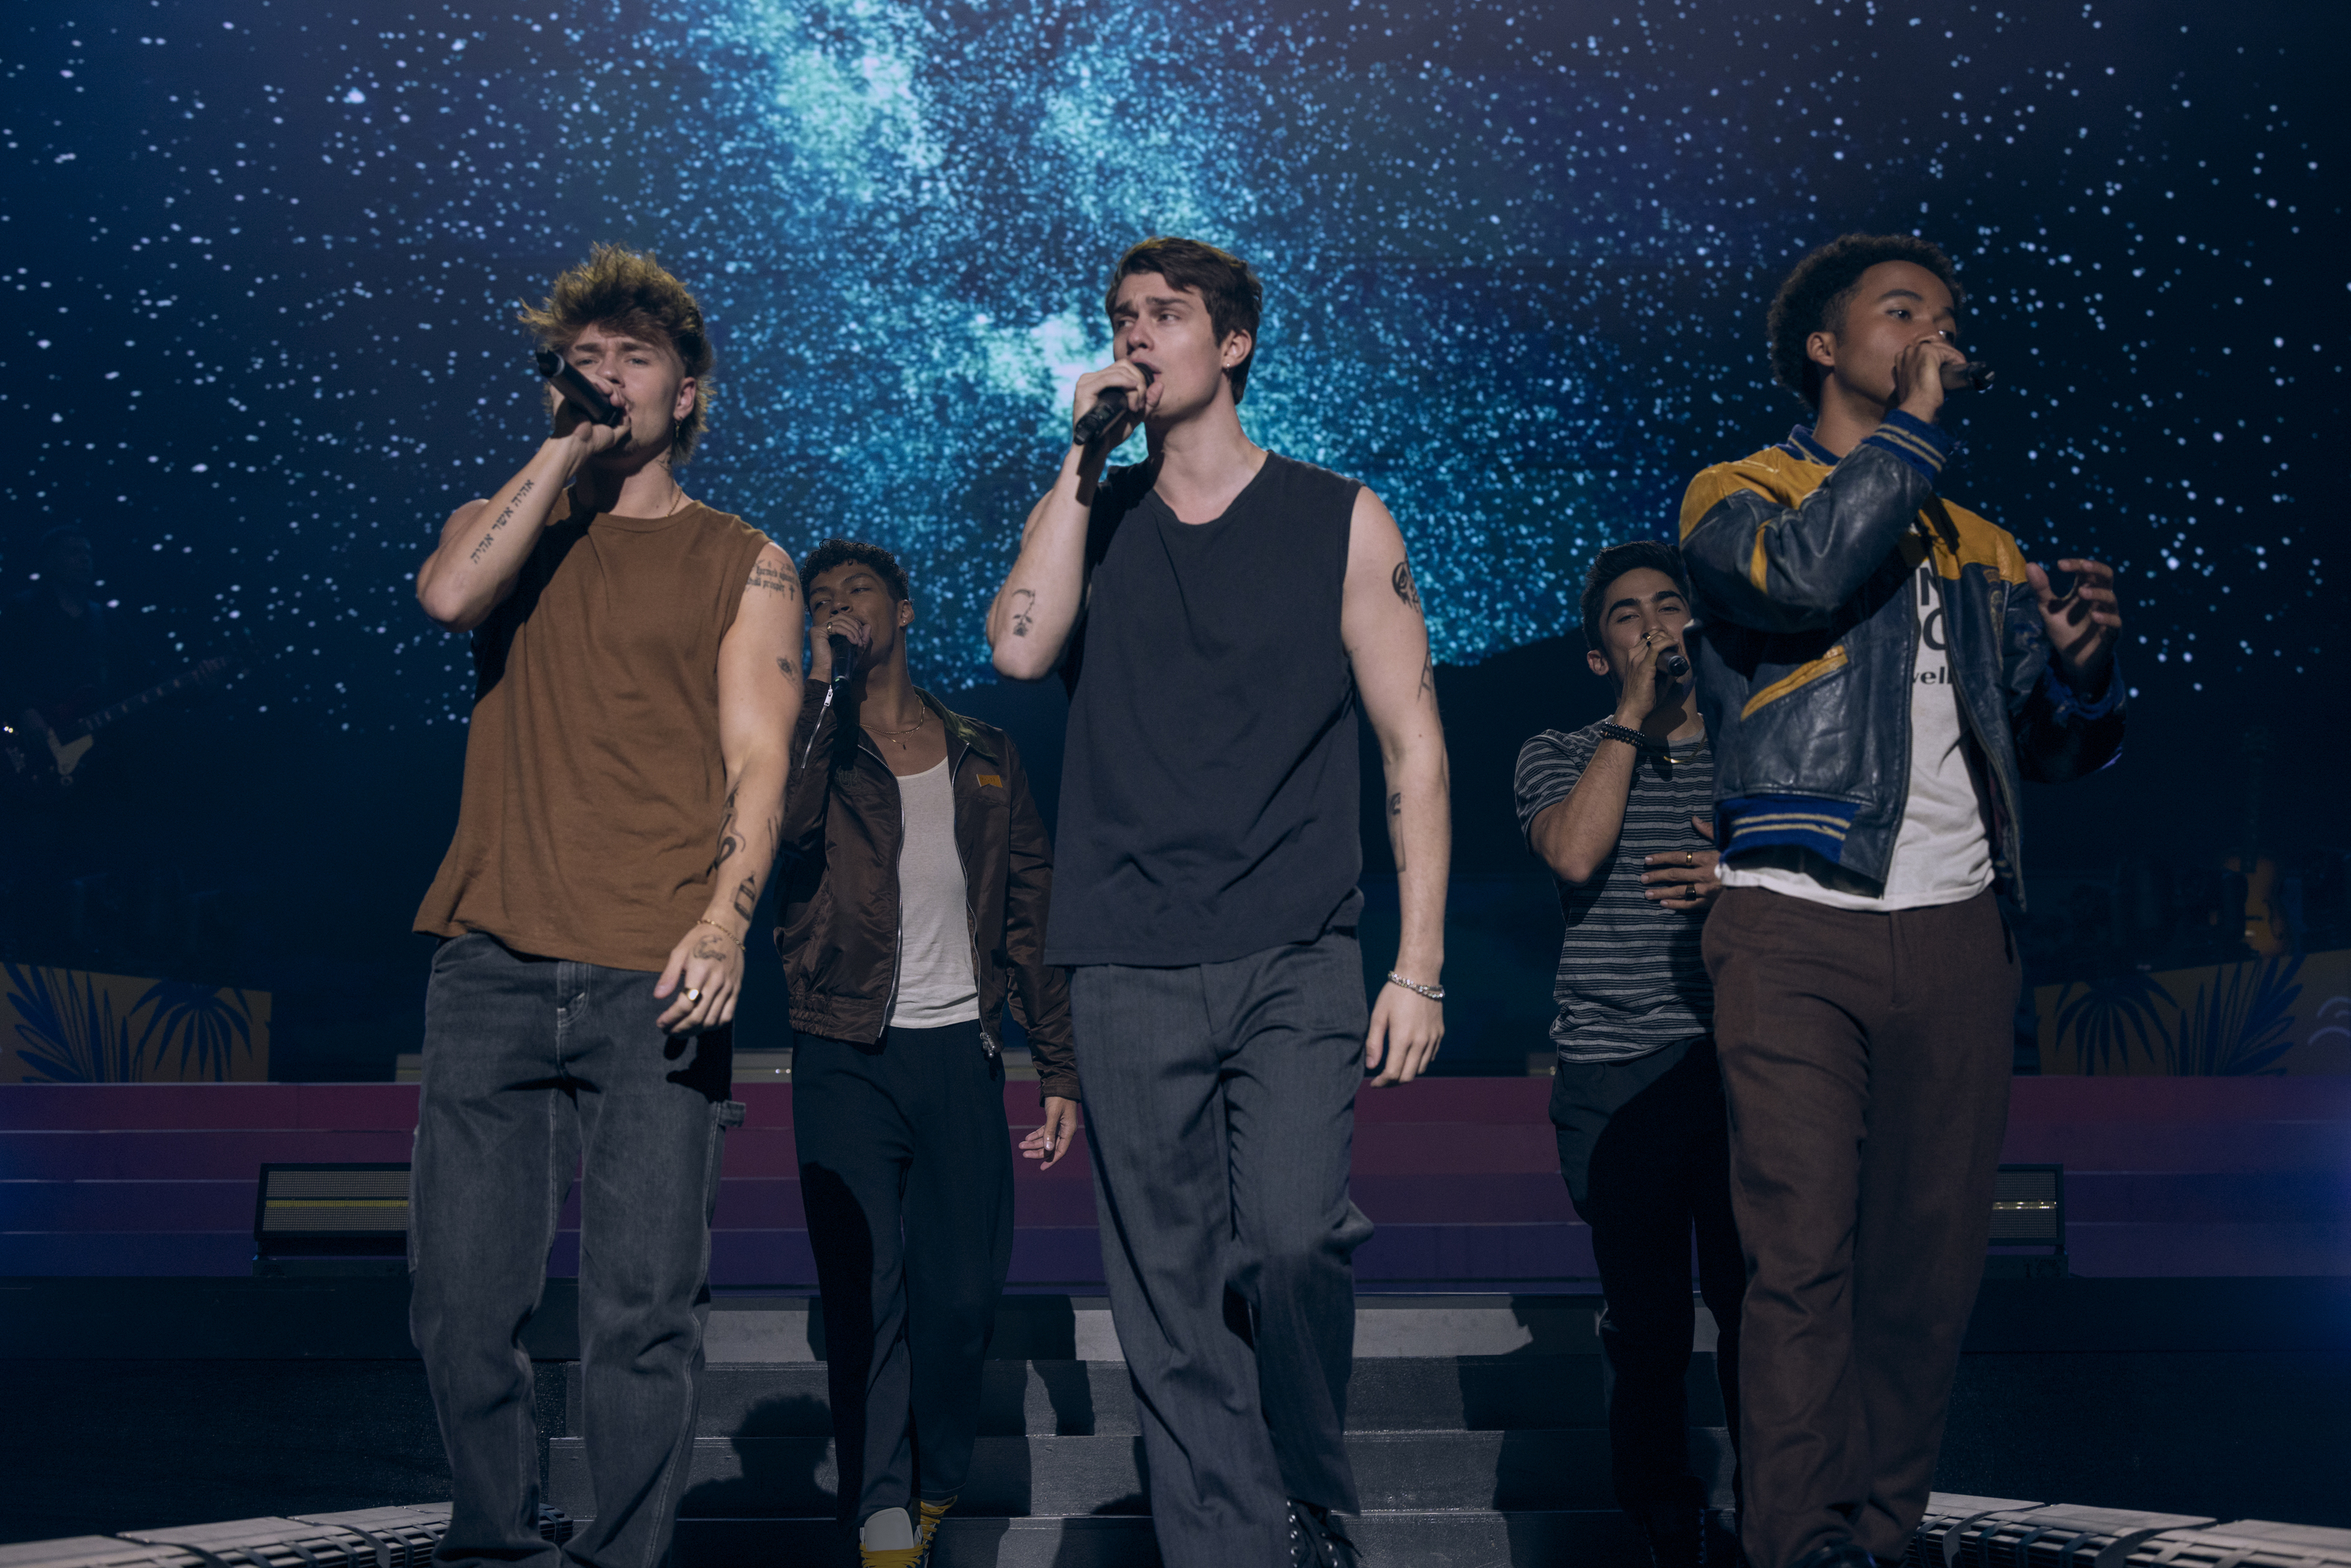 A boy band performs on stage; three members sing into microphones with a glowing backdrop